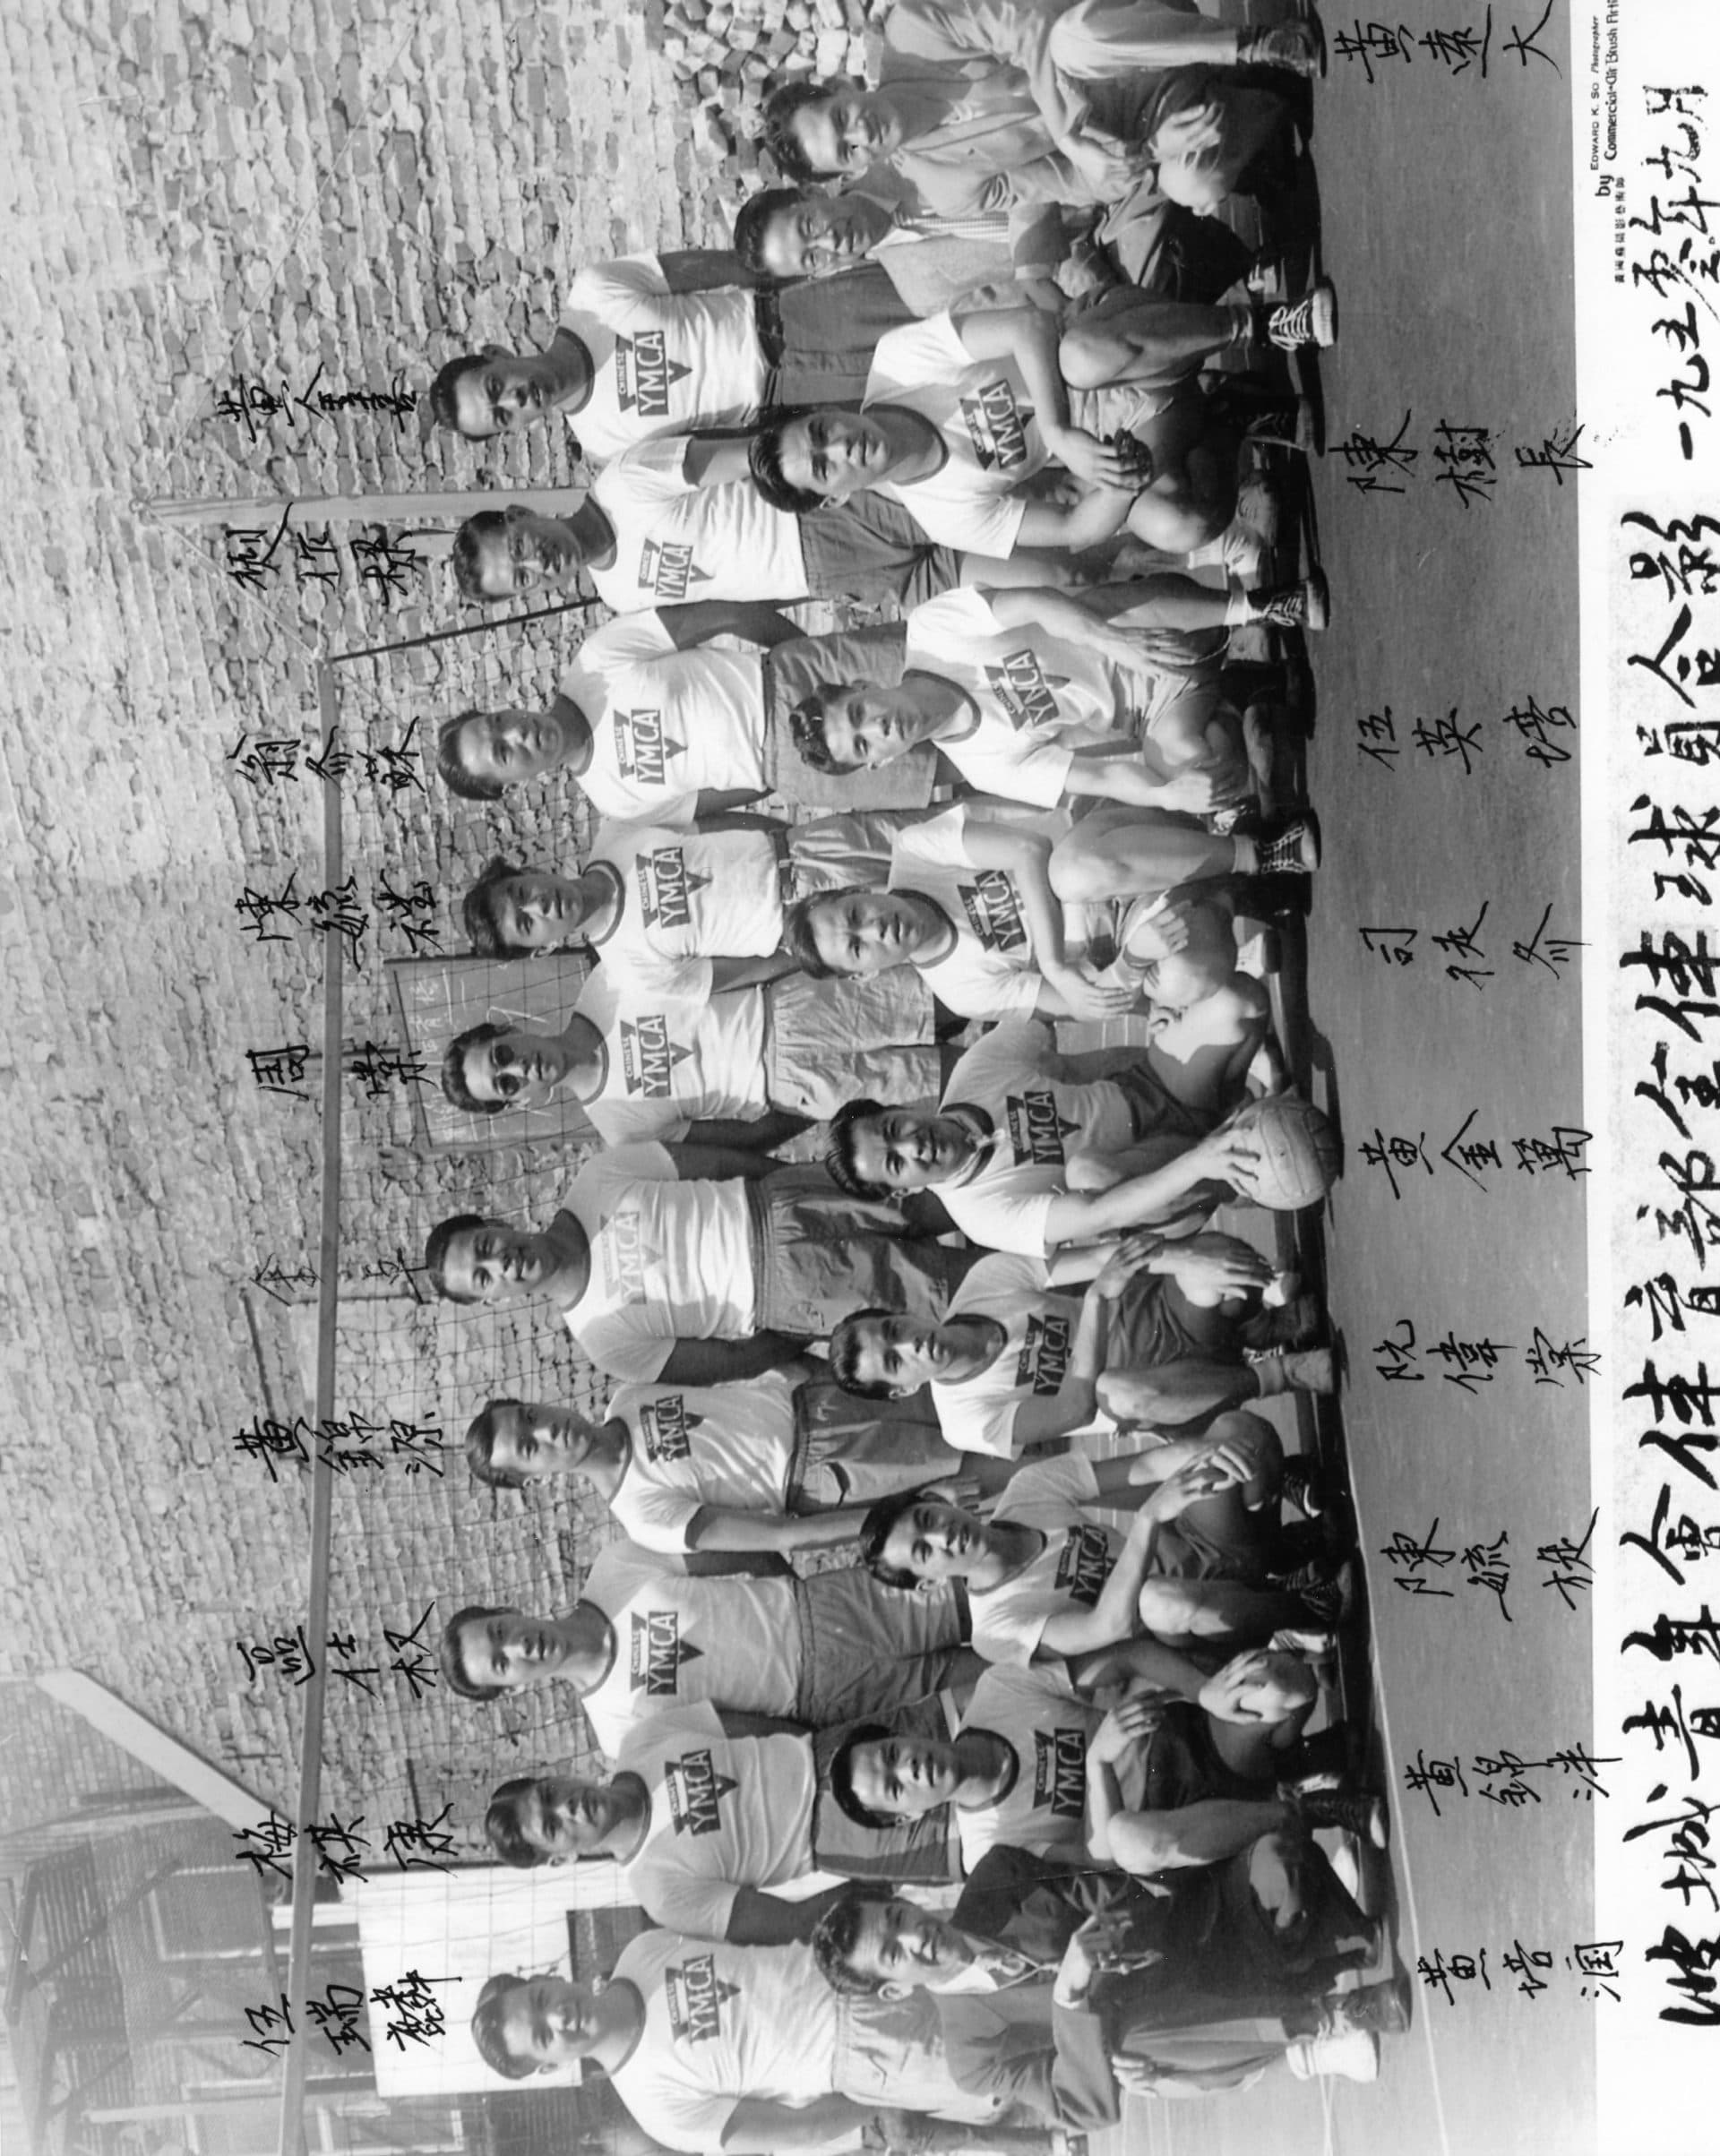 The Boston YMCA volleyball team poses for a group photo in 1950.  (Courtesy of the New England Sports Photography Collection Chinese Historical Society)